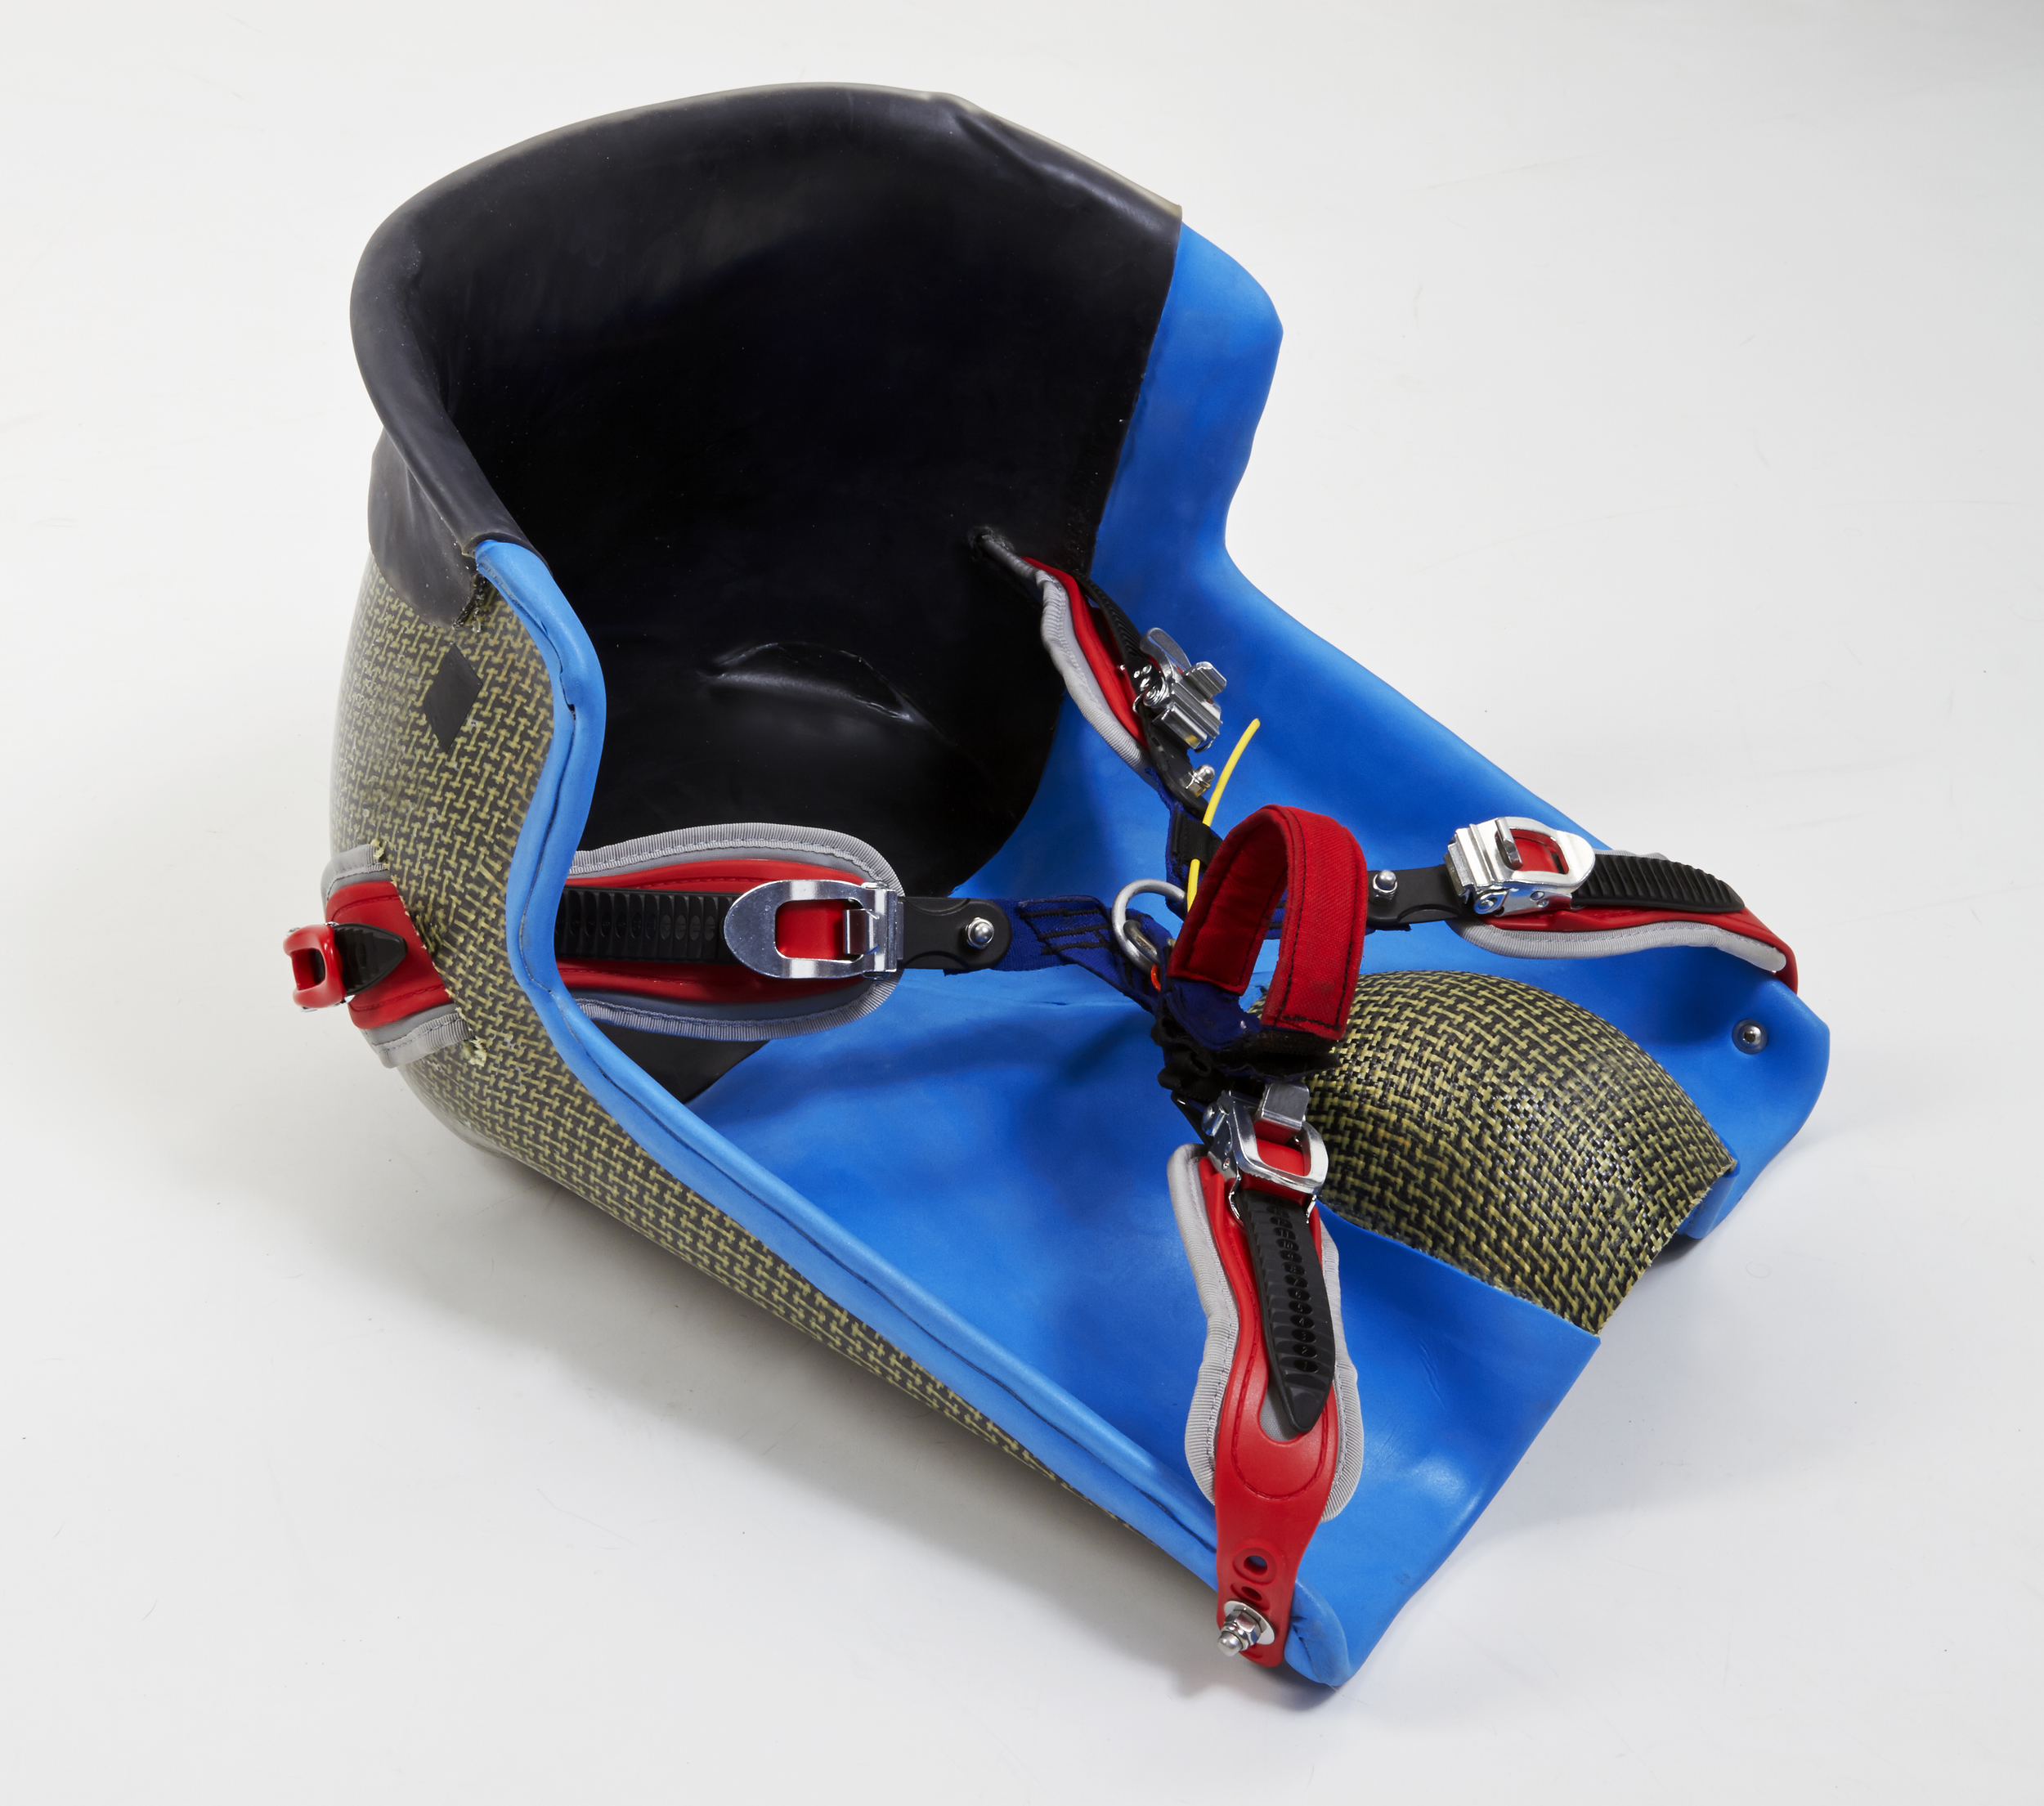  The seat is designed for the highest level of stability and the most accurate control. The fastening system provides absolute connection to the seat which makes the heeling (as the most important part of wild water maneuvering) easy to control. 